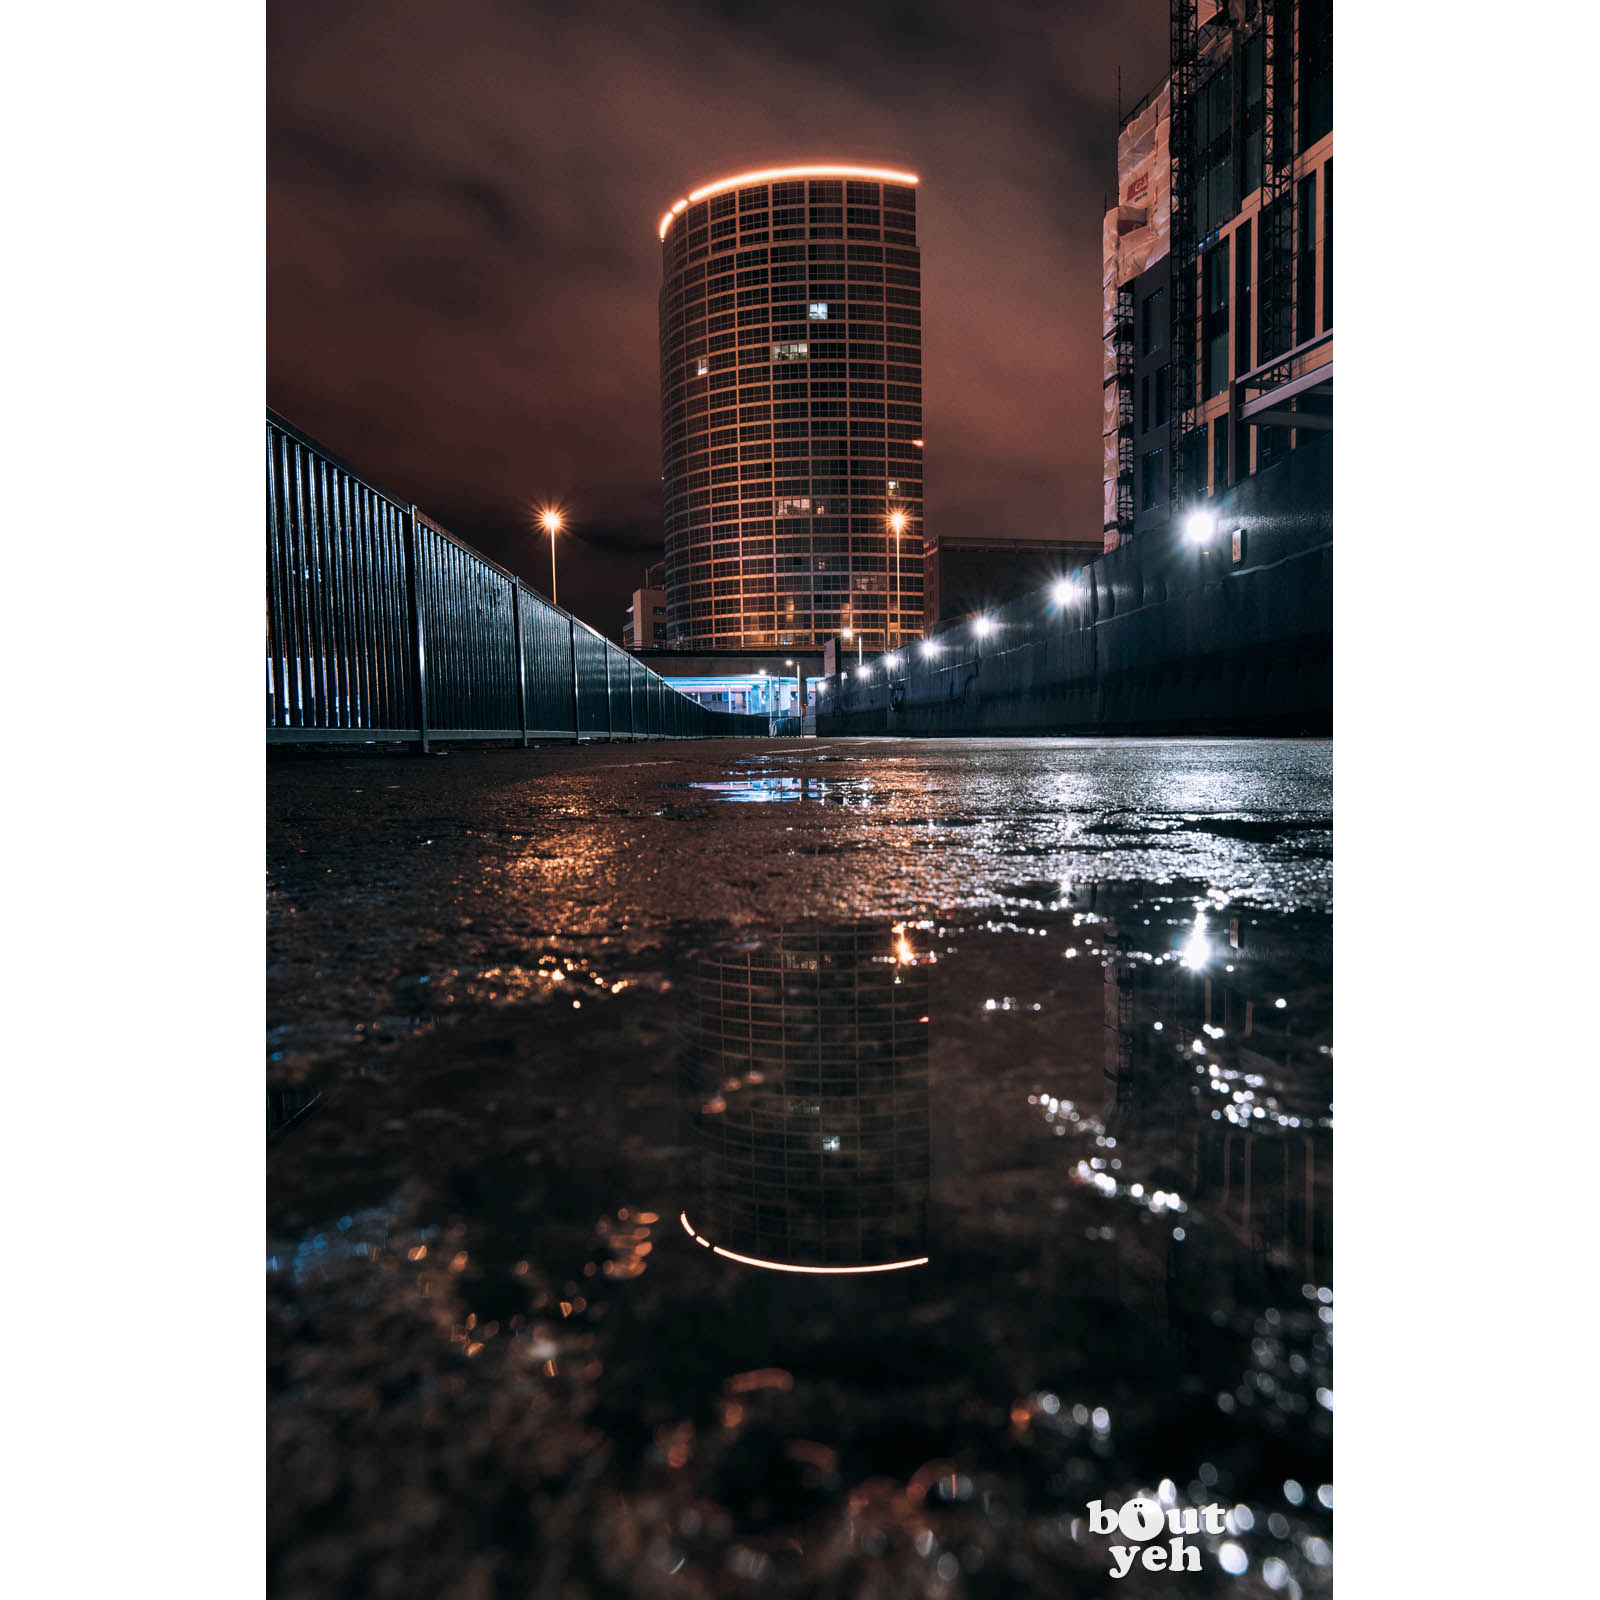 Obel Tower Belfast Northern Ireland by rskb - photographic print for sale.